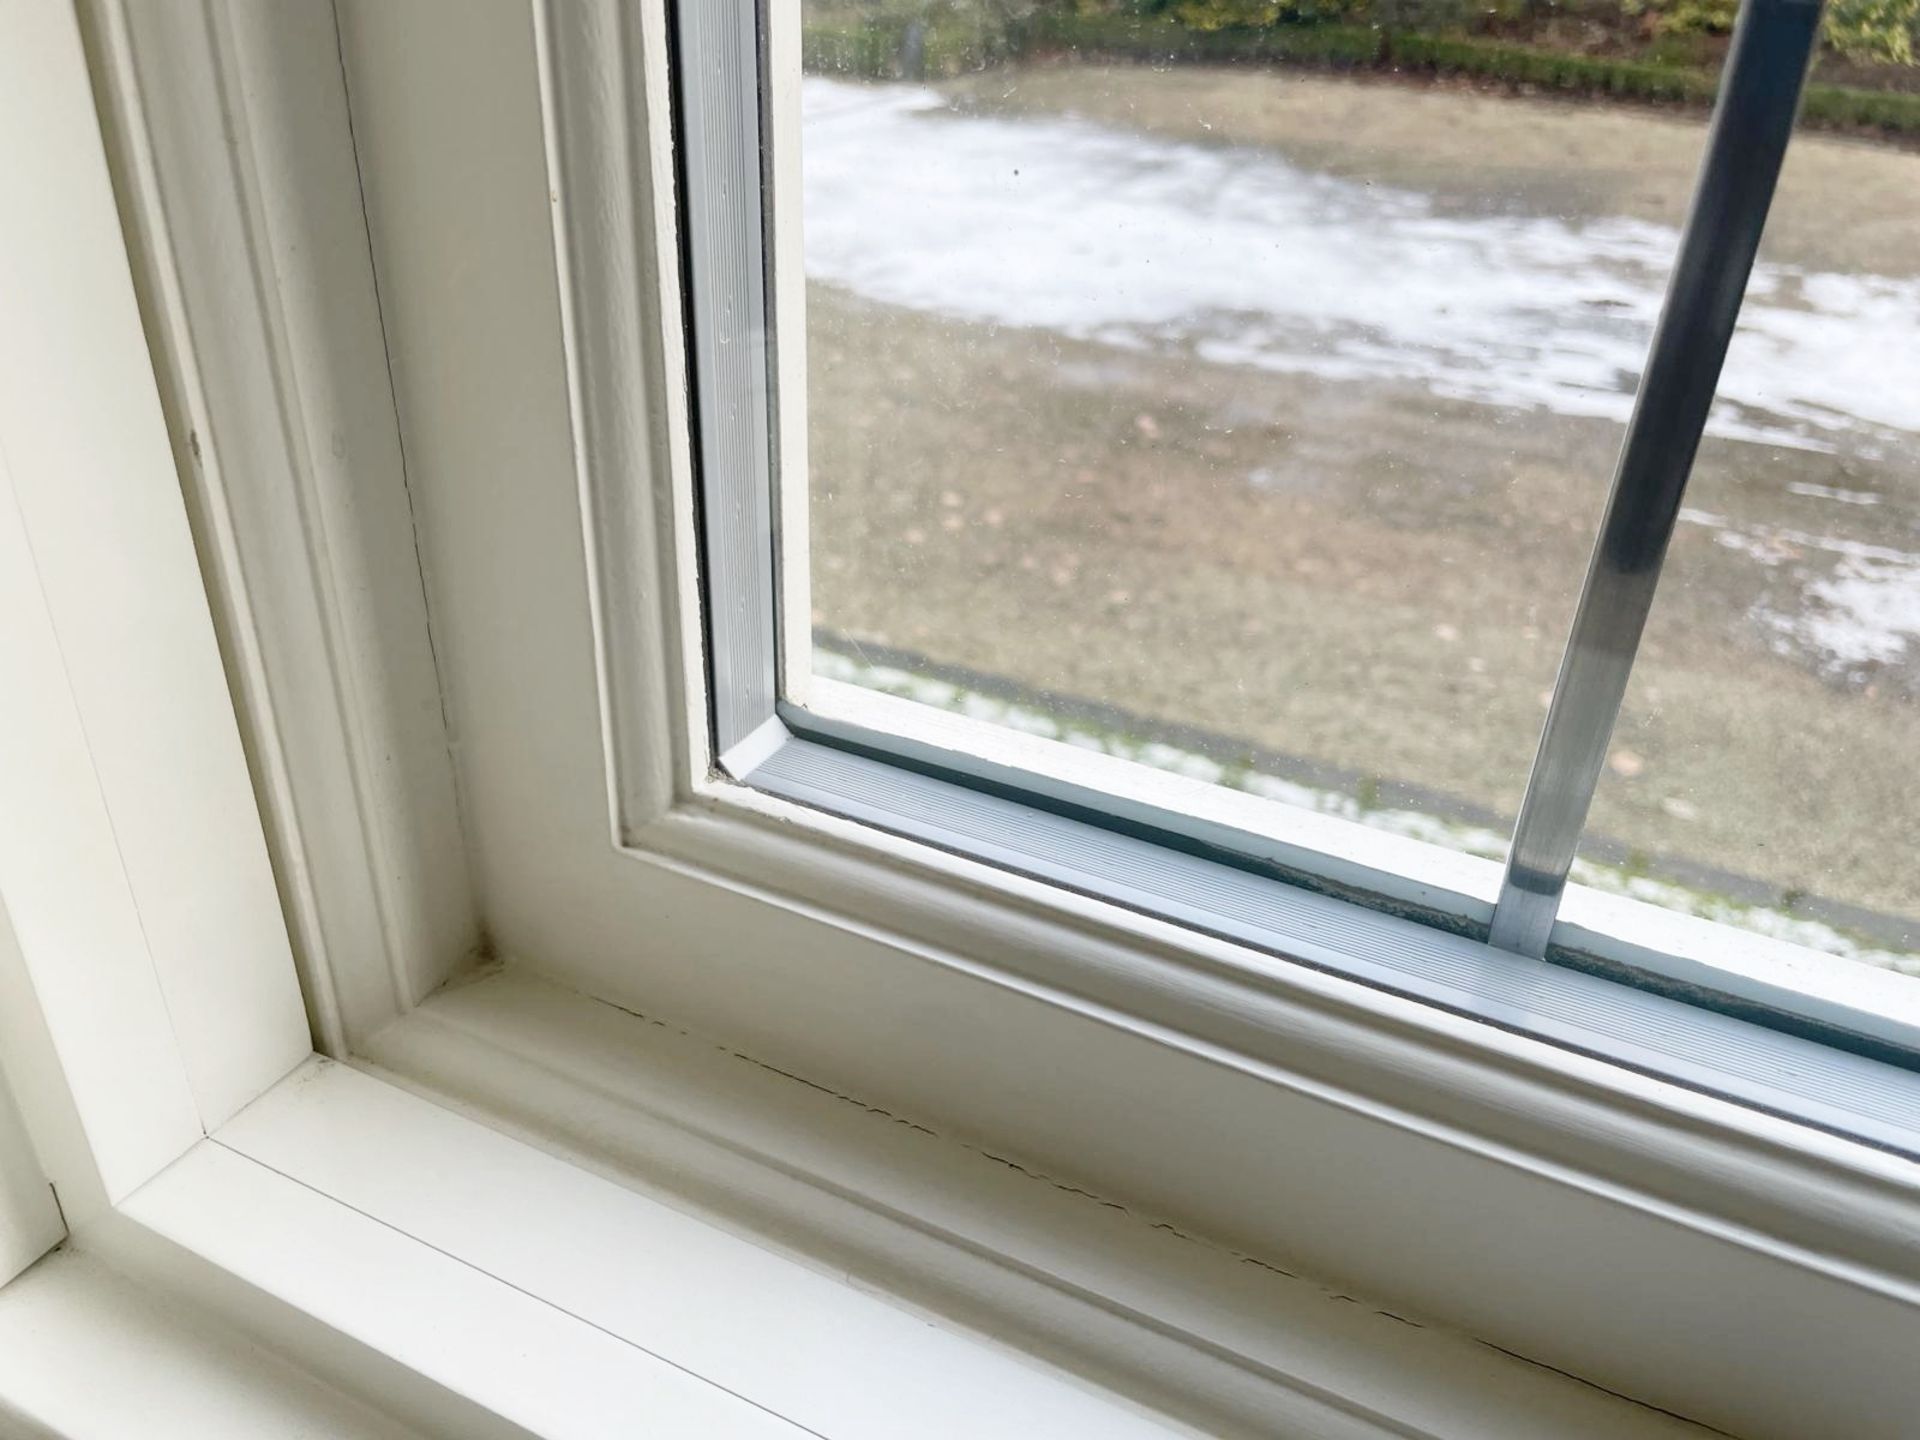 1 x Hardwood Timber Double Glazed Leaded 3-Pane Window Frame fitted with Shutter Blinds - Image 11 of 15